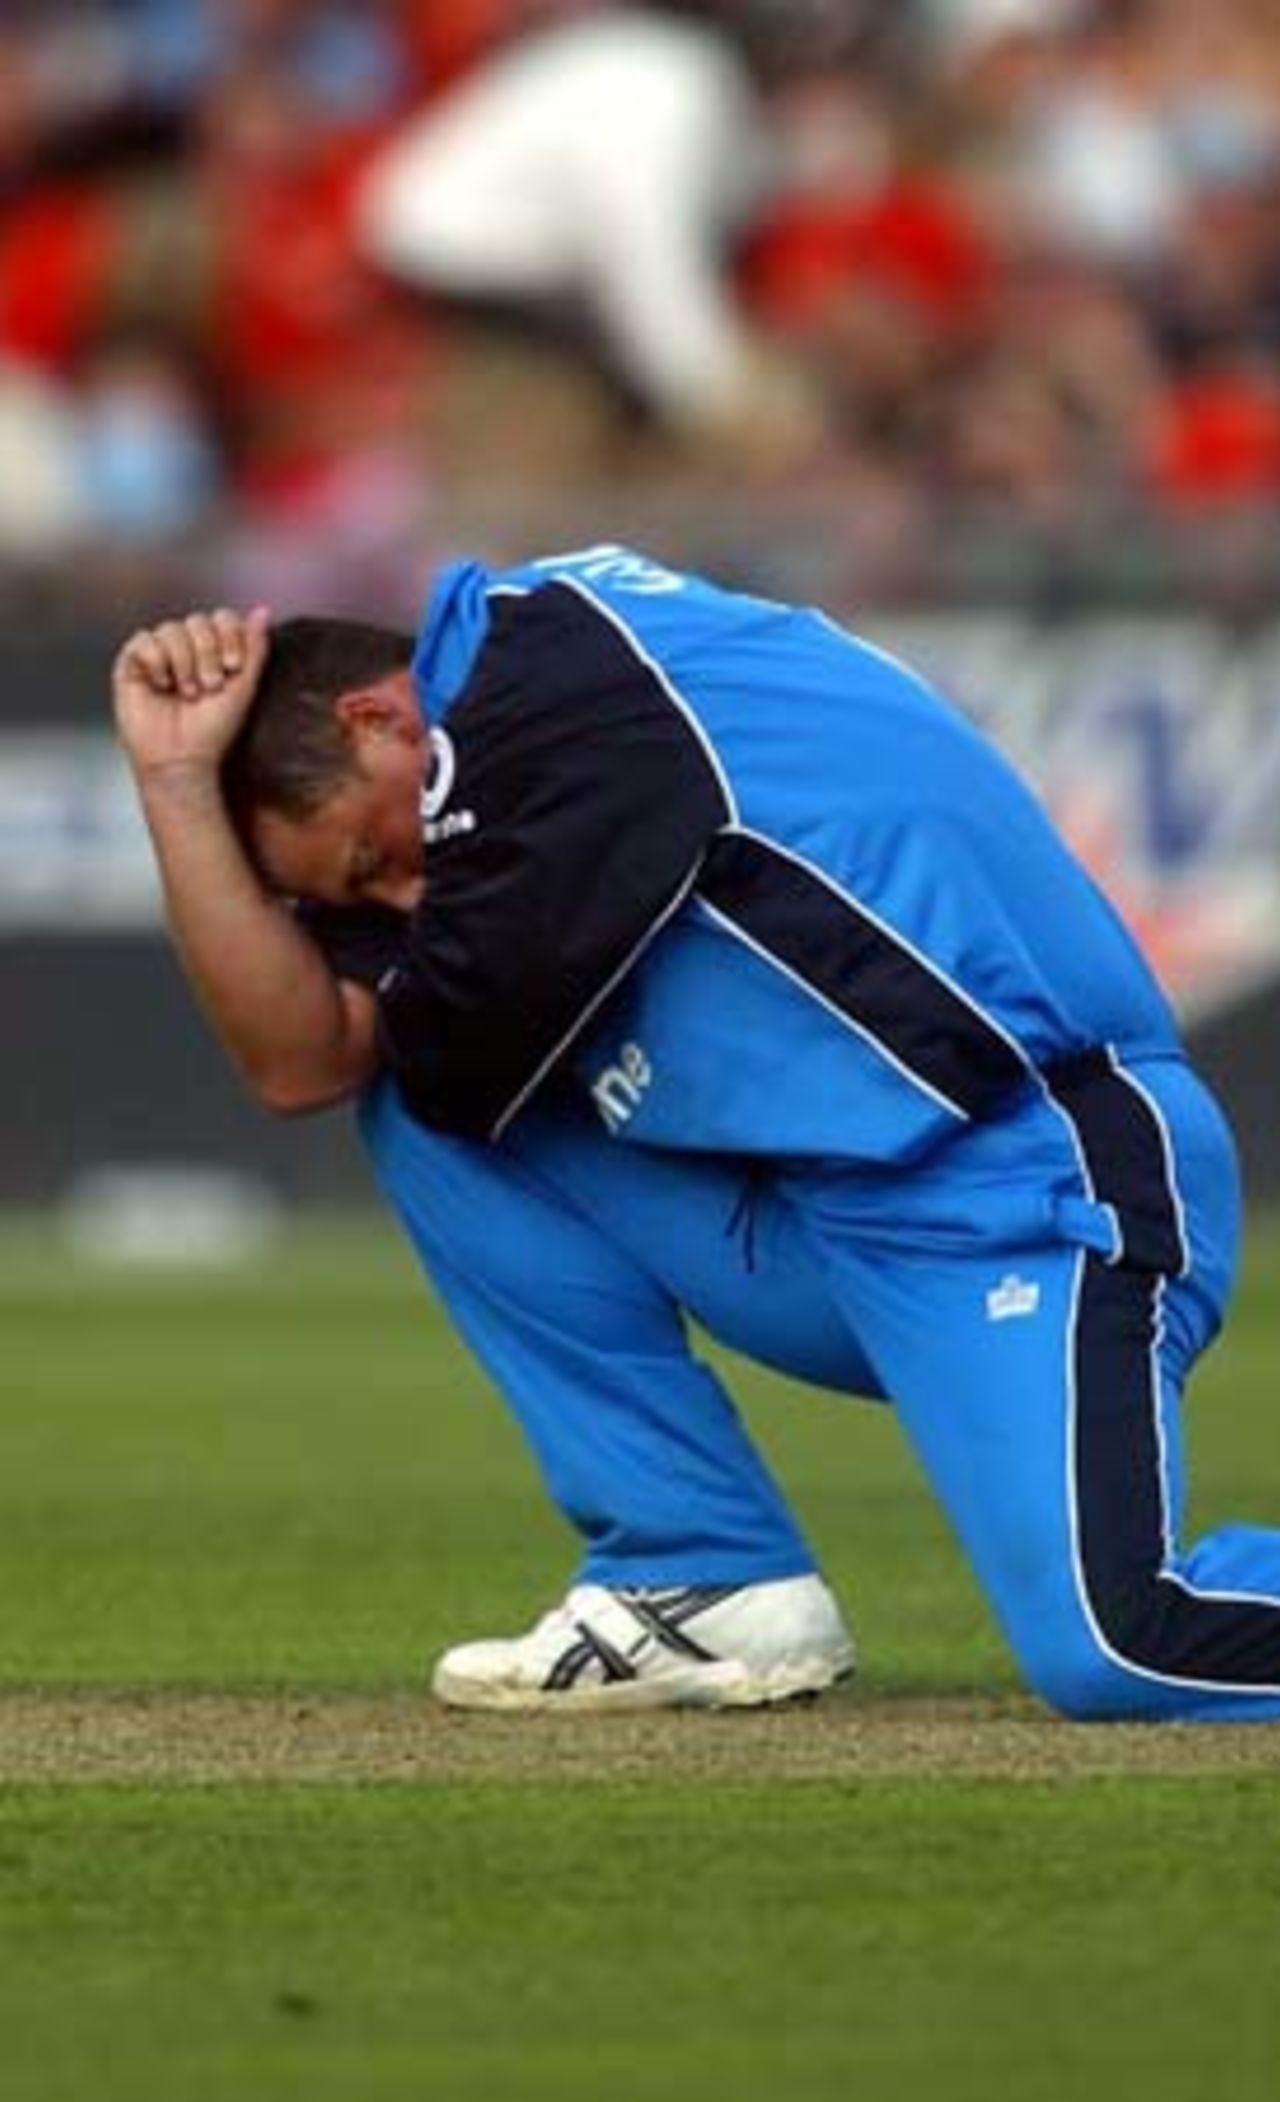 England bowler Gough shows his frustration after an lbw appeal against New Zealand batsman Nathan Astle is turned down by umpire Steve Dunne during his spell of 2-42 from 10 overs. 5th ODI: New Zealand v England at Carisbrook, Dunedin, 26 February 2002.